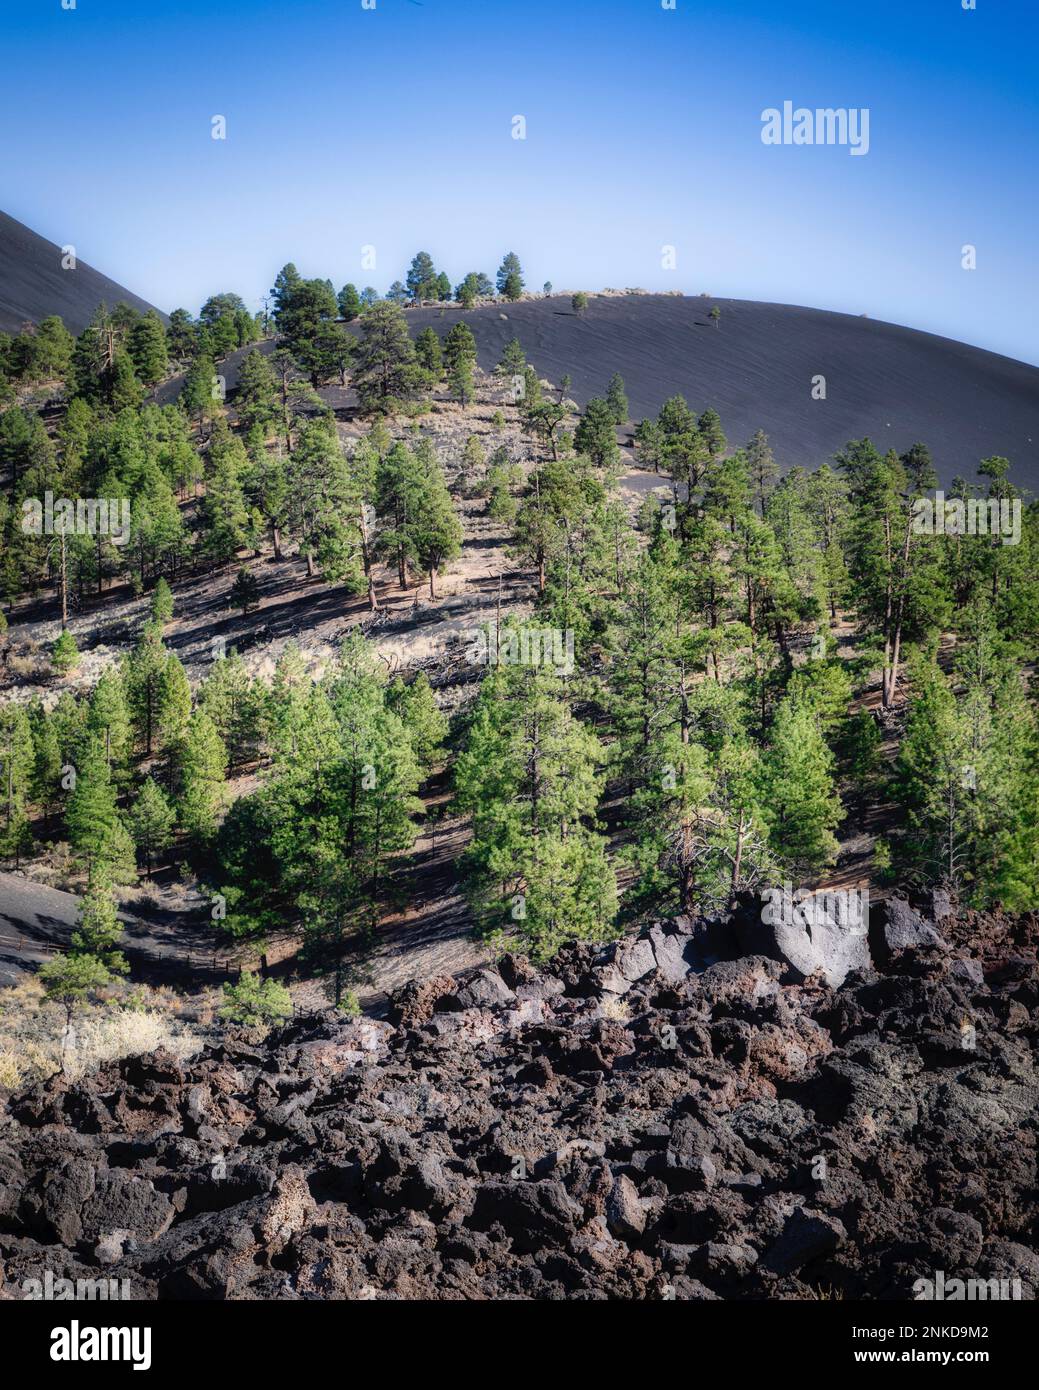 The volcanic remains scattered across Sunset Crater near Flagstaff, Arizona. Stock Photo